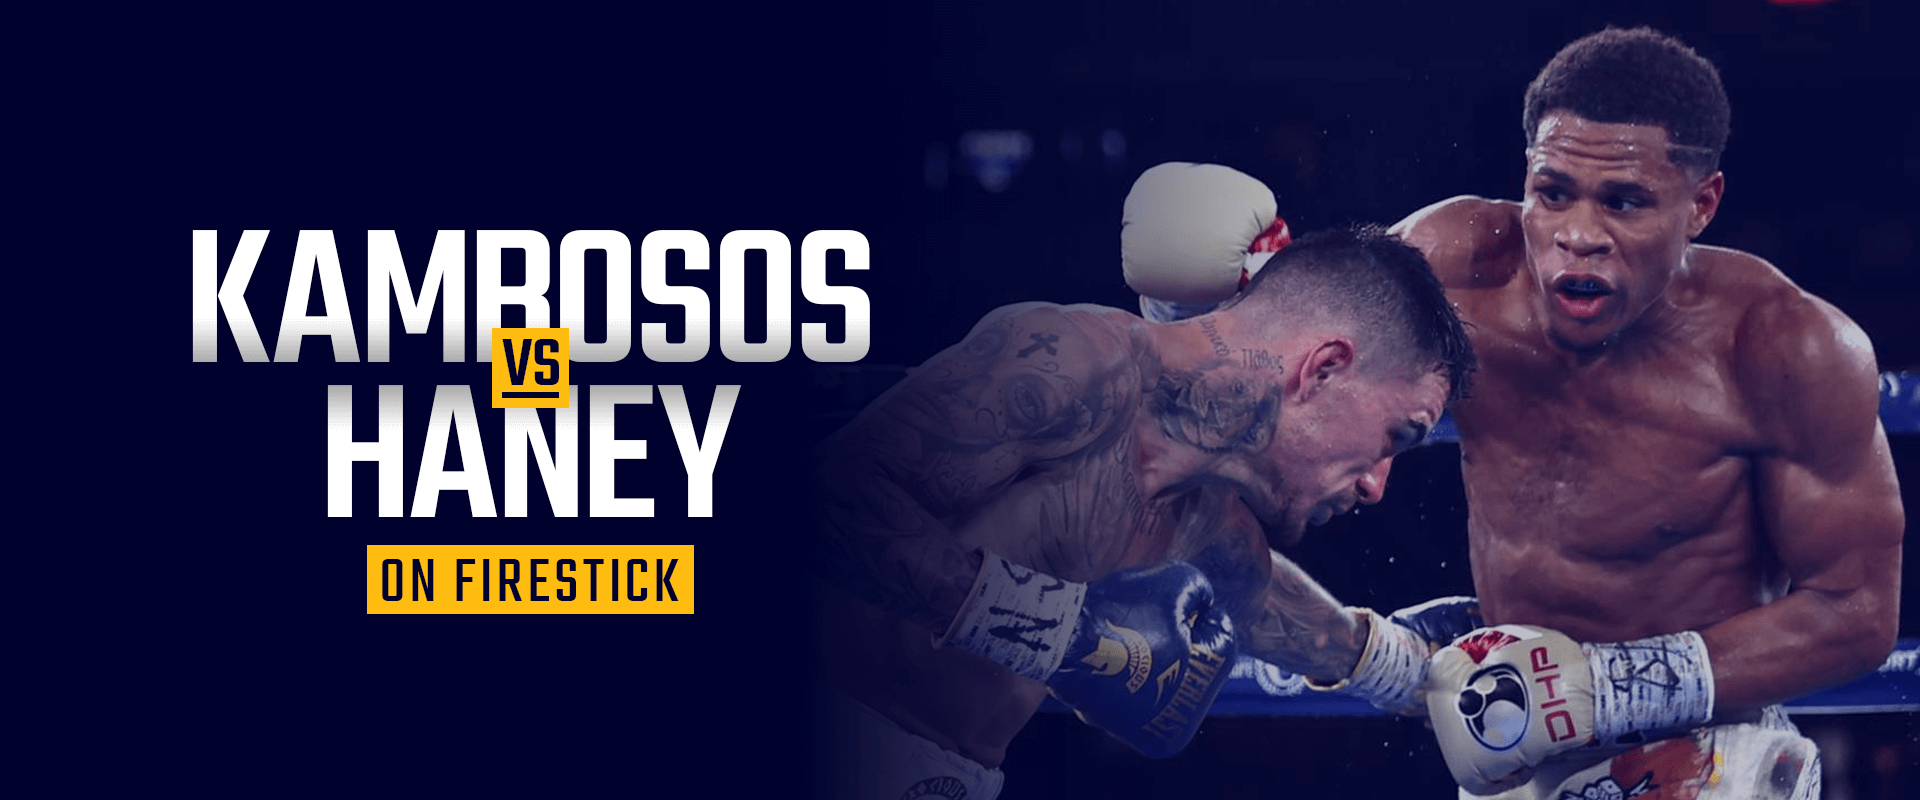 How to Watch George Kambosos vs Devin Haney on Firestick